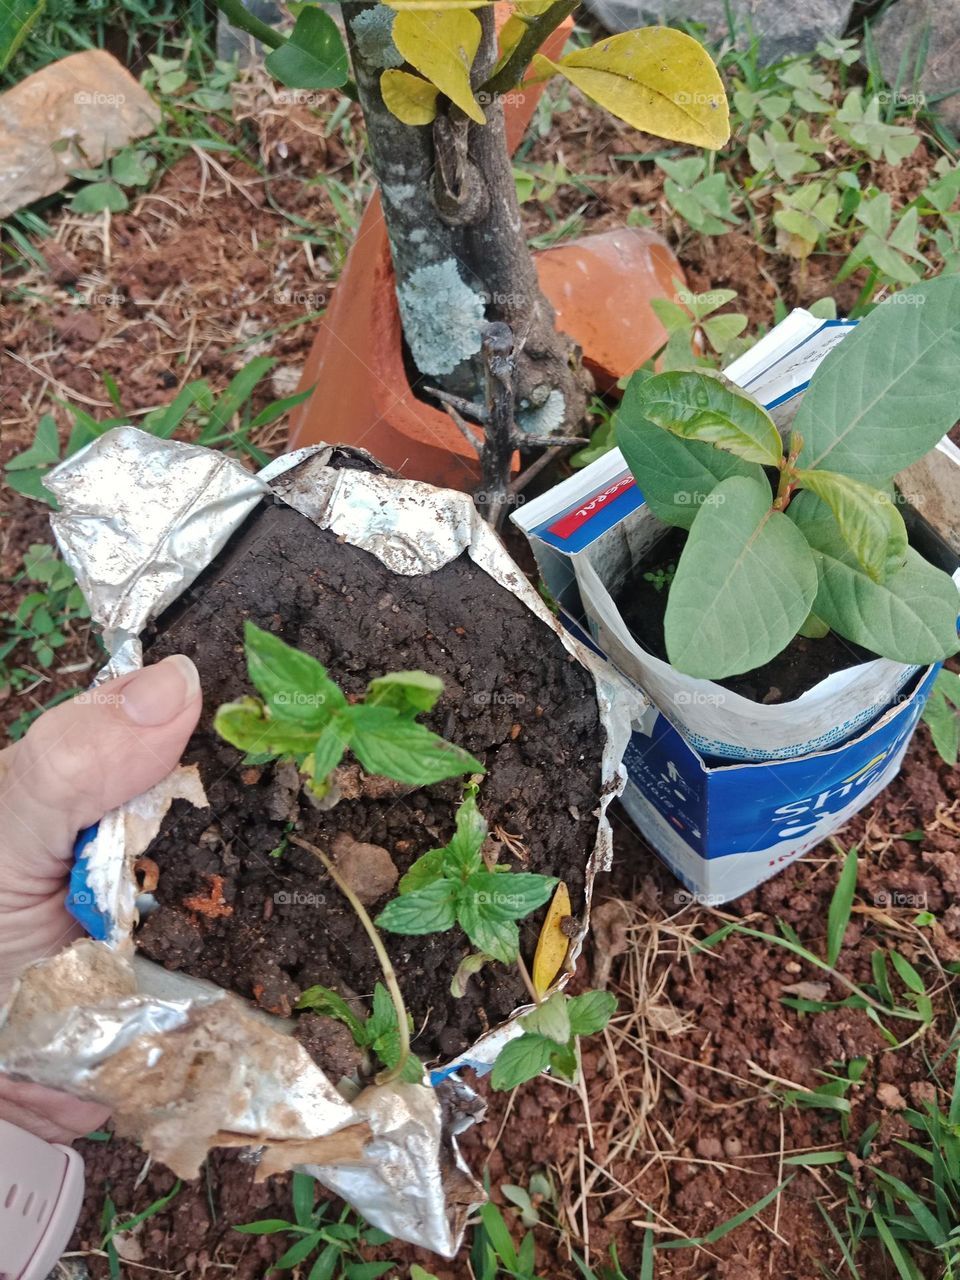 Planting, basil and a guava tree